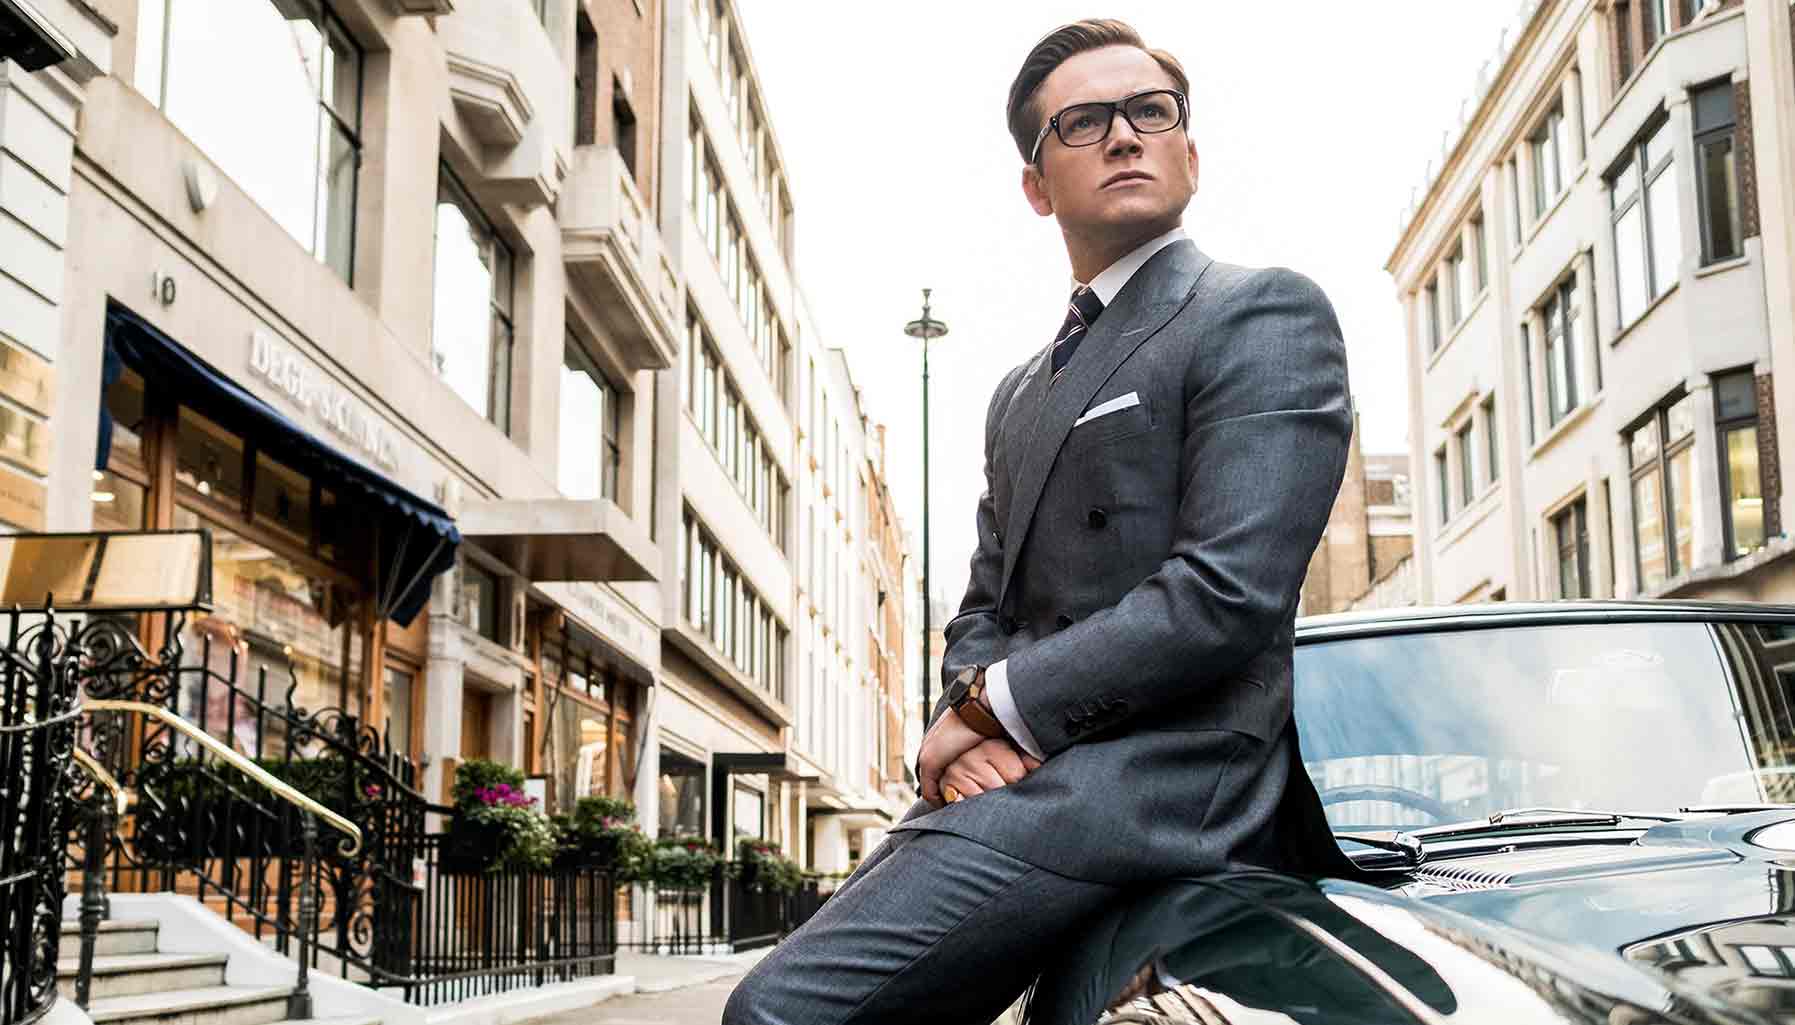 Tag Heuer Easter Eggs in Kingsman: The Golden Circle